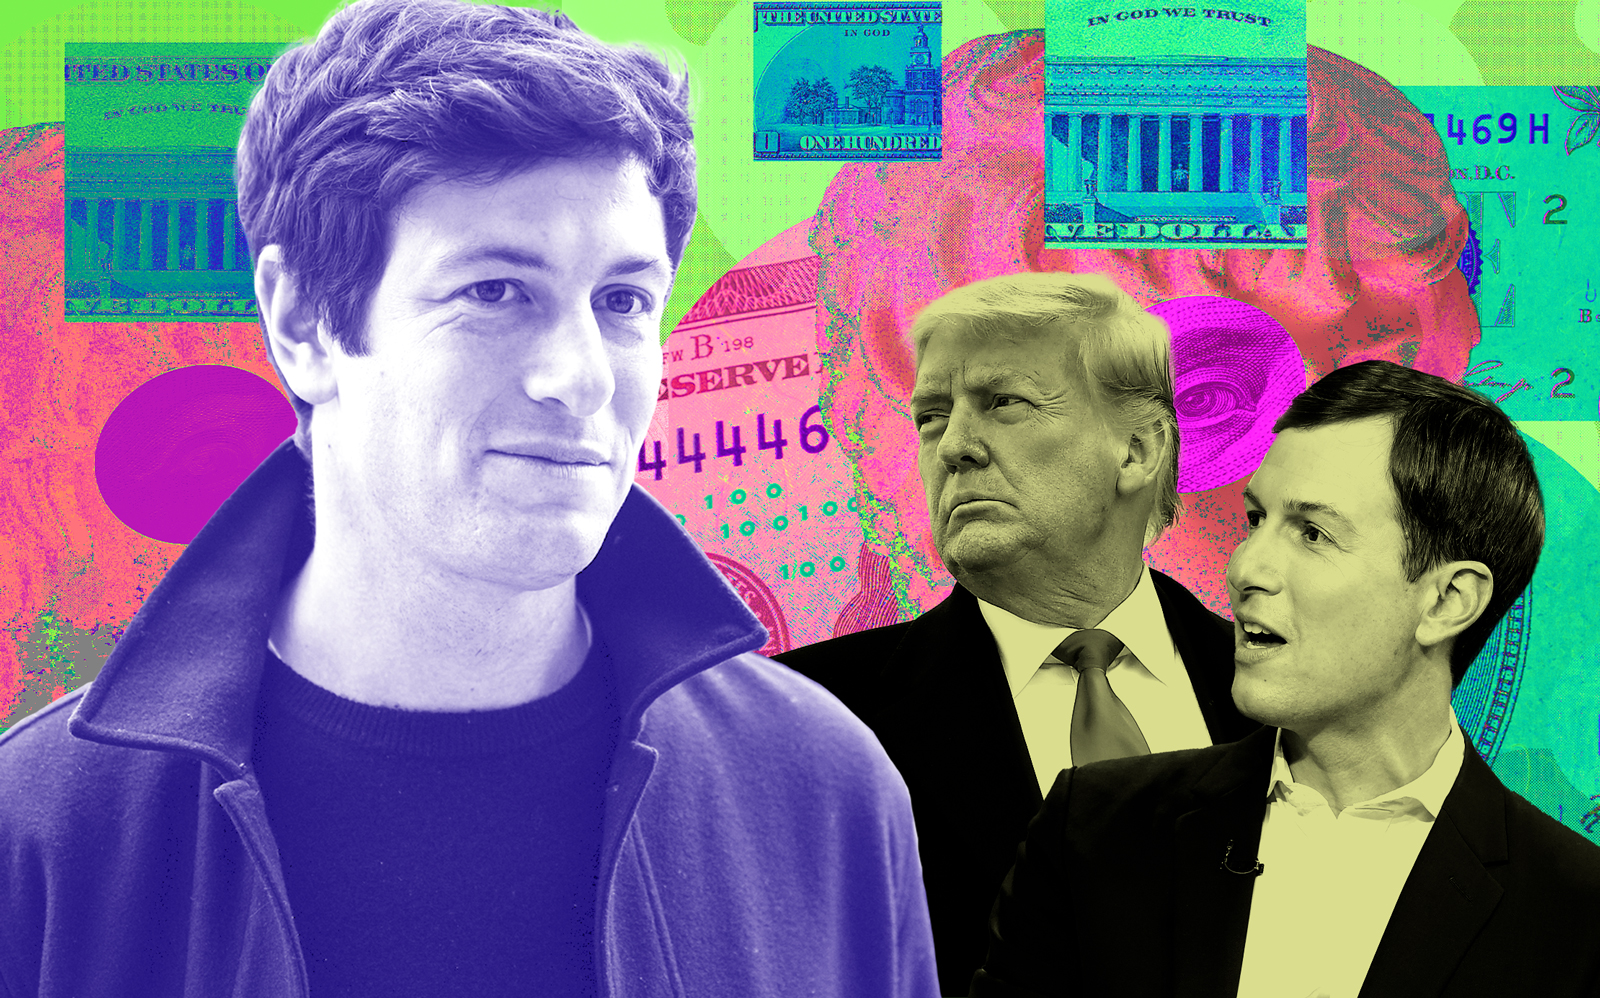 The other Kushner is the billionaire mogul to watch